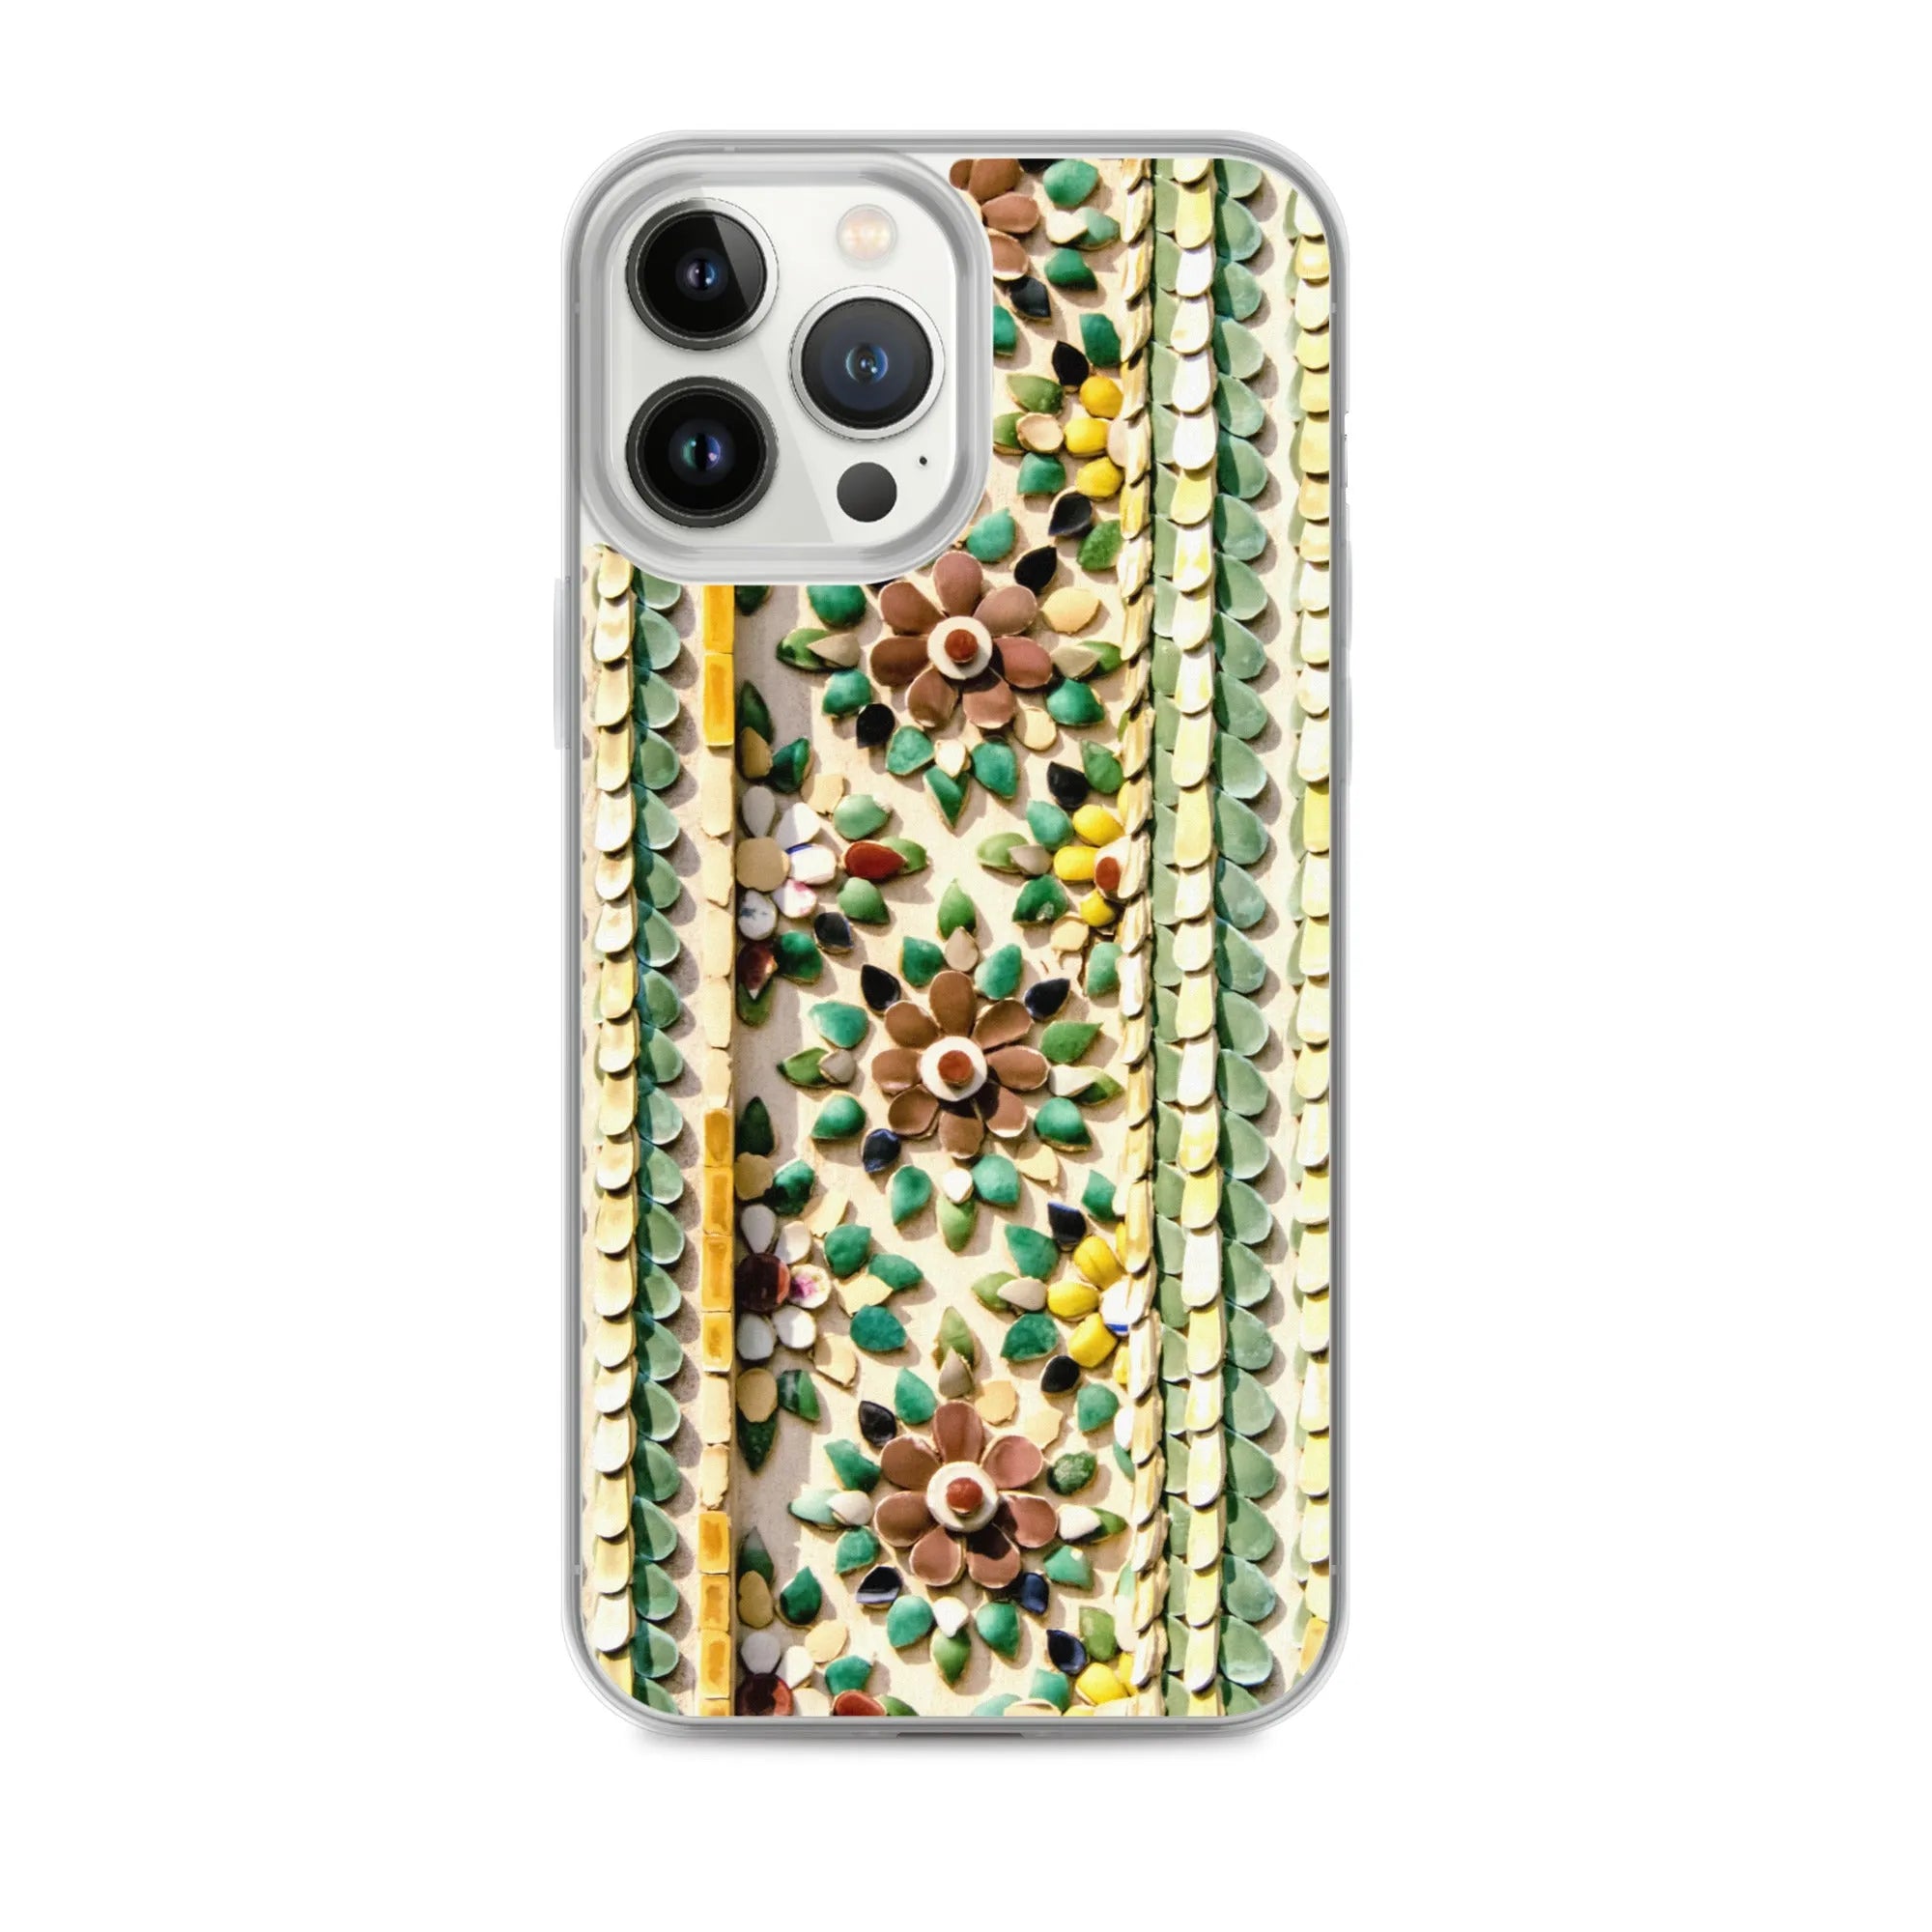 Flower Beds Pattern Iphone Case - Iphone 13 Pro Max - Mobile Phone Cases - Aesthetic Art